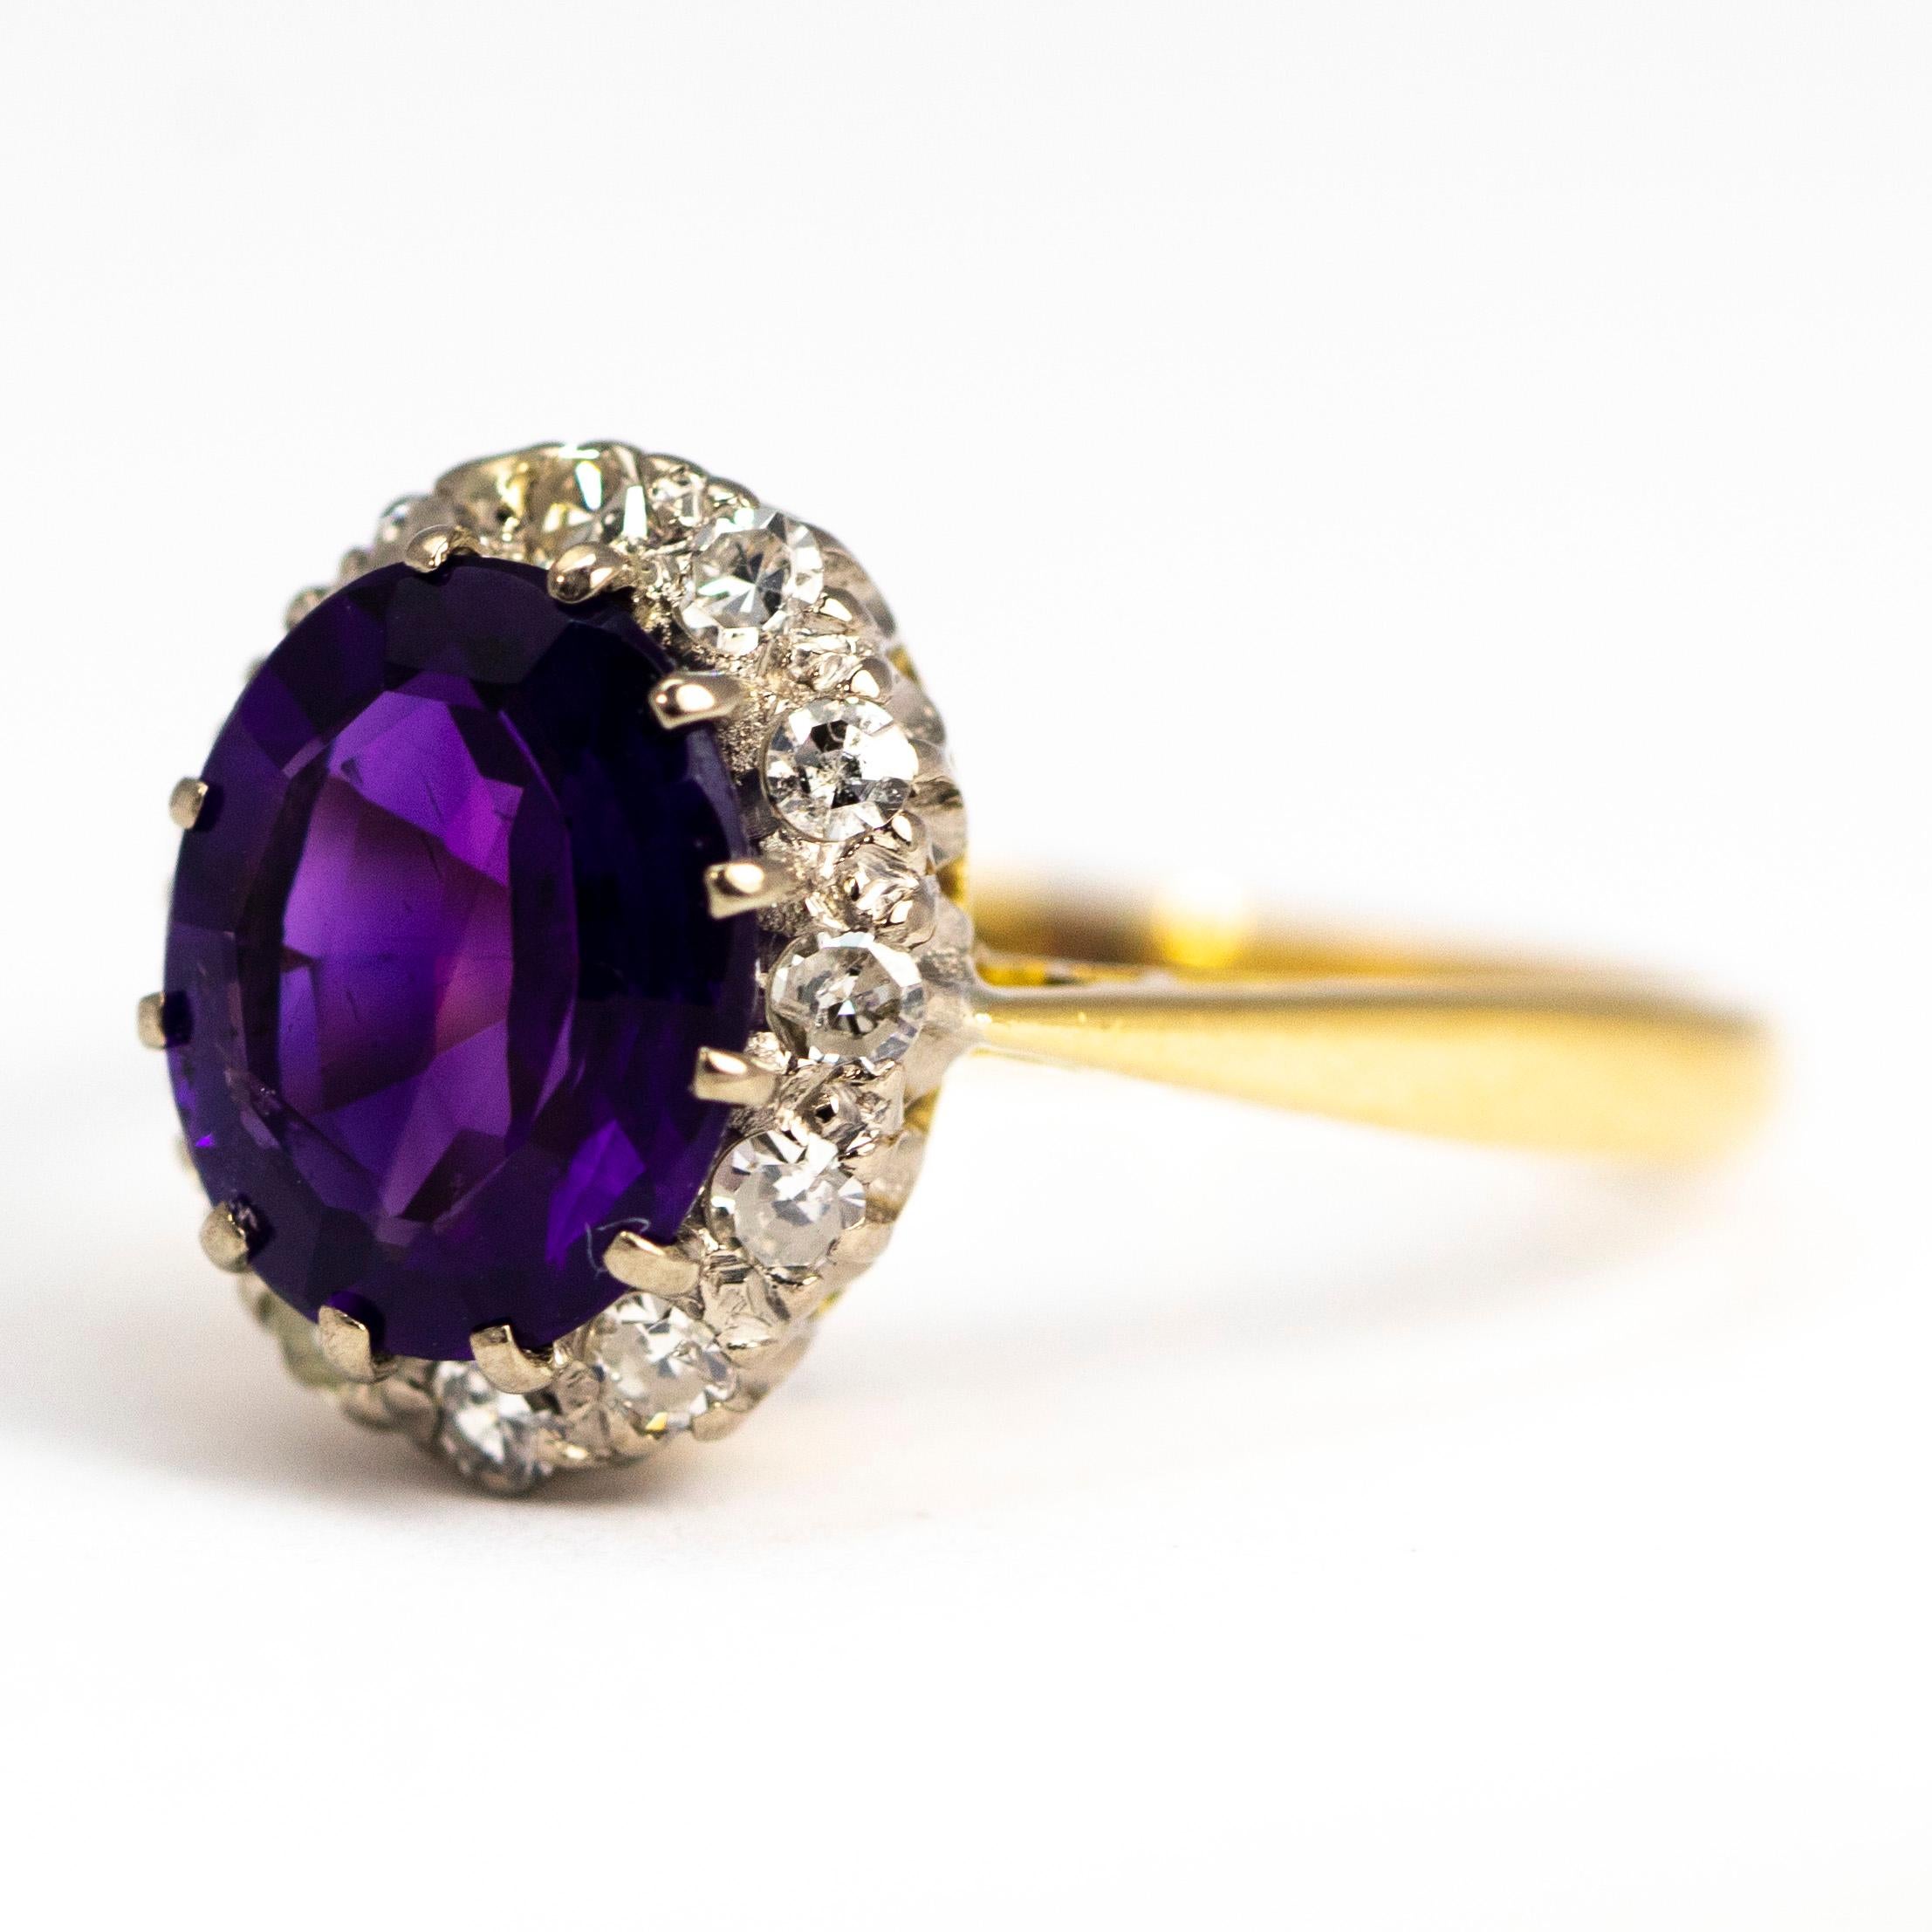 The stones in this ring are set in platinum and the rest of the ring is modelled in 18carat gold. The central amethyst measures approximately 2carats and is surrounded by shimmering old European cut diamonds. 

Ring Size: Q or 8 1/4 
Cluster